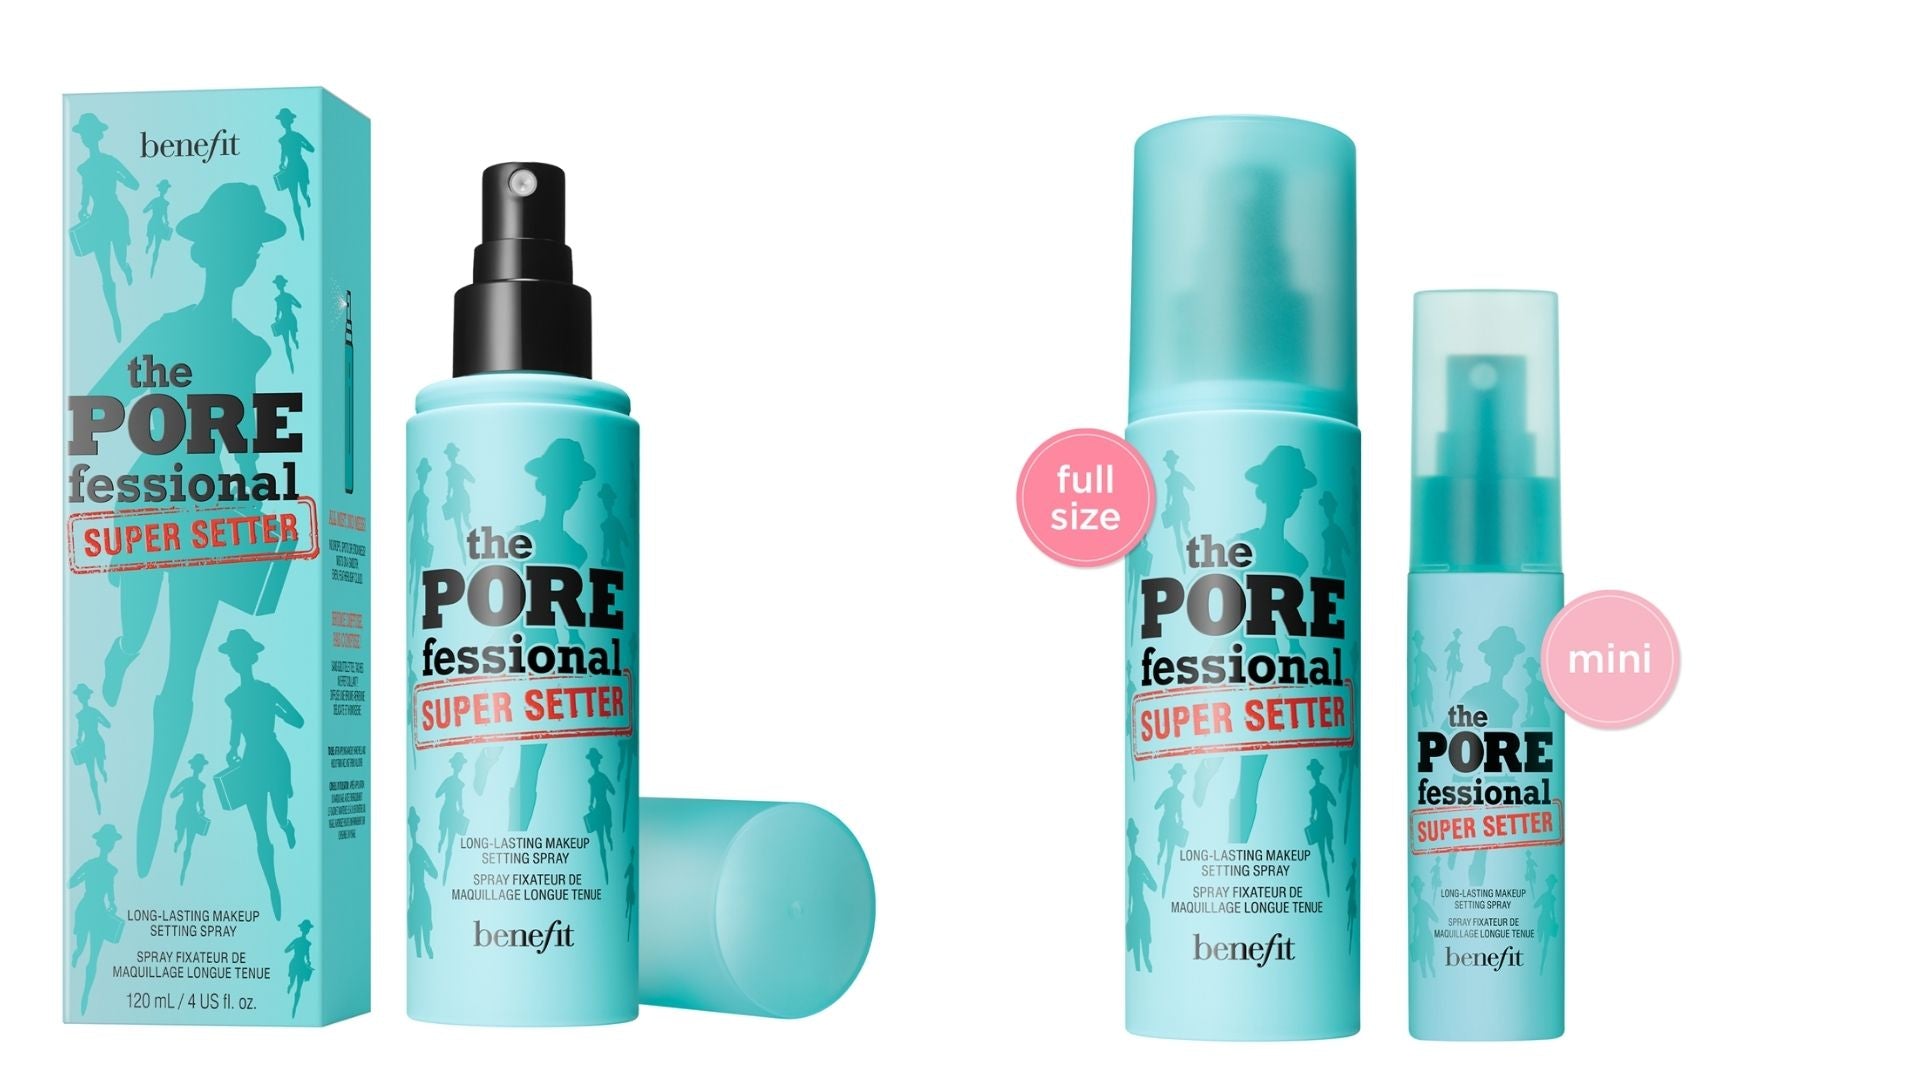 review, photos, ingredients, swatches, makeup, skin care, trends, 2021, 2022, benefit cosmetics, the porefessional super setter, setting spray, best new setting sprays, long-lasting makeup, high end makeup, high end setting sprays